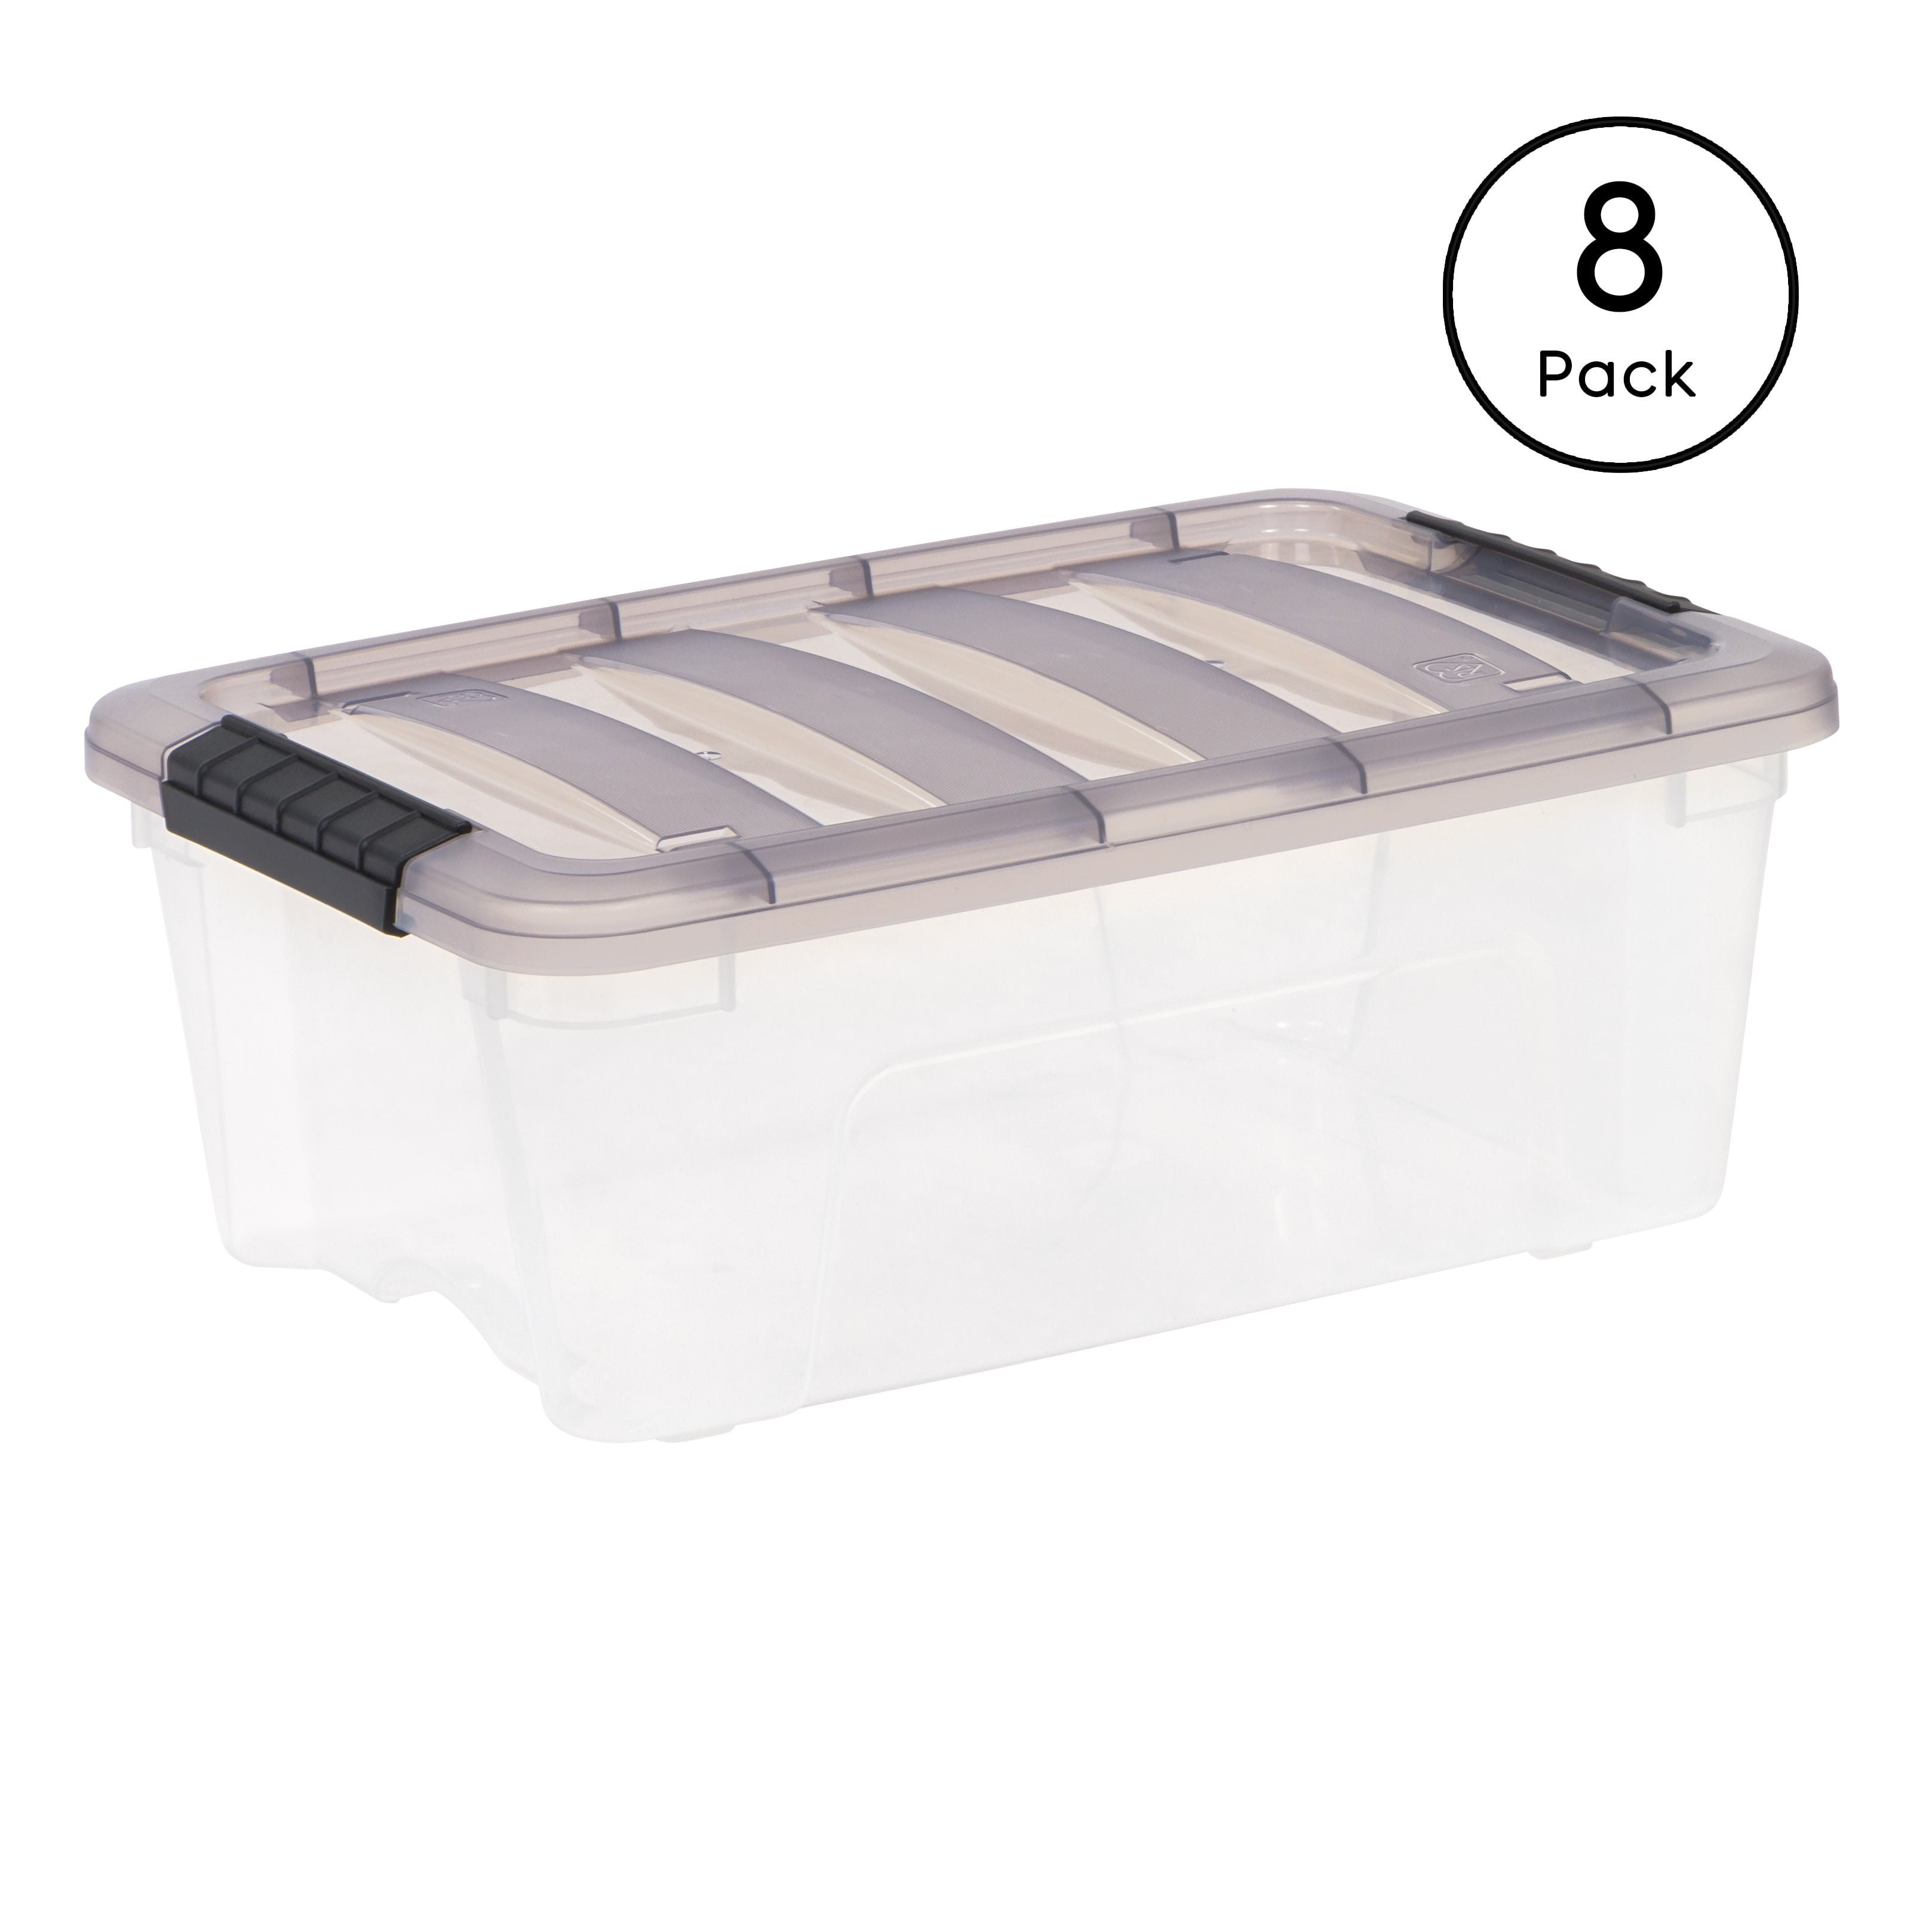 6 Packs Uumitty 6 Litre Small Clear First Aid Storage Box Bin Container With Transparent Grey Lid and Handles